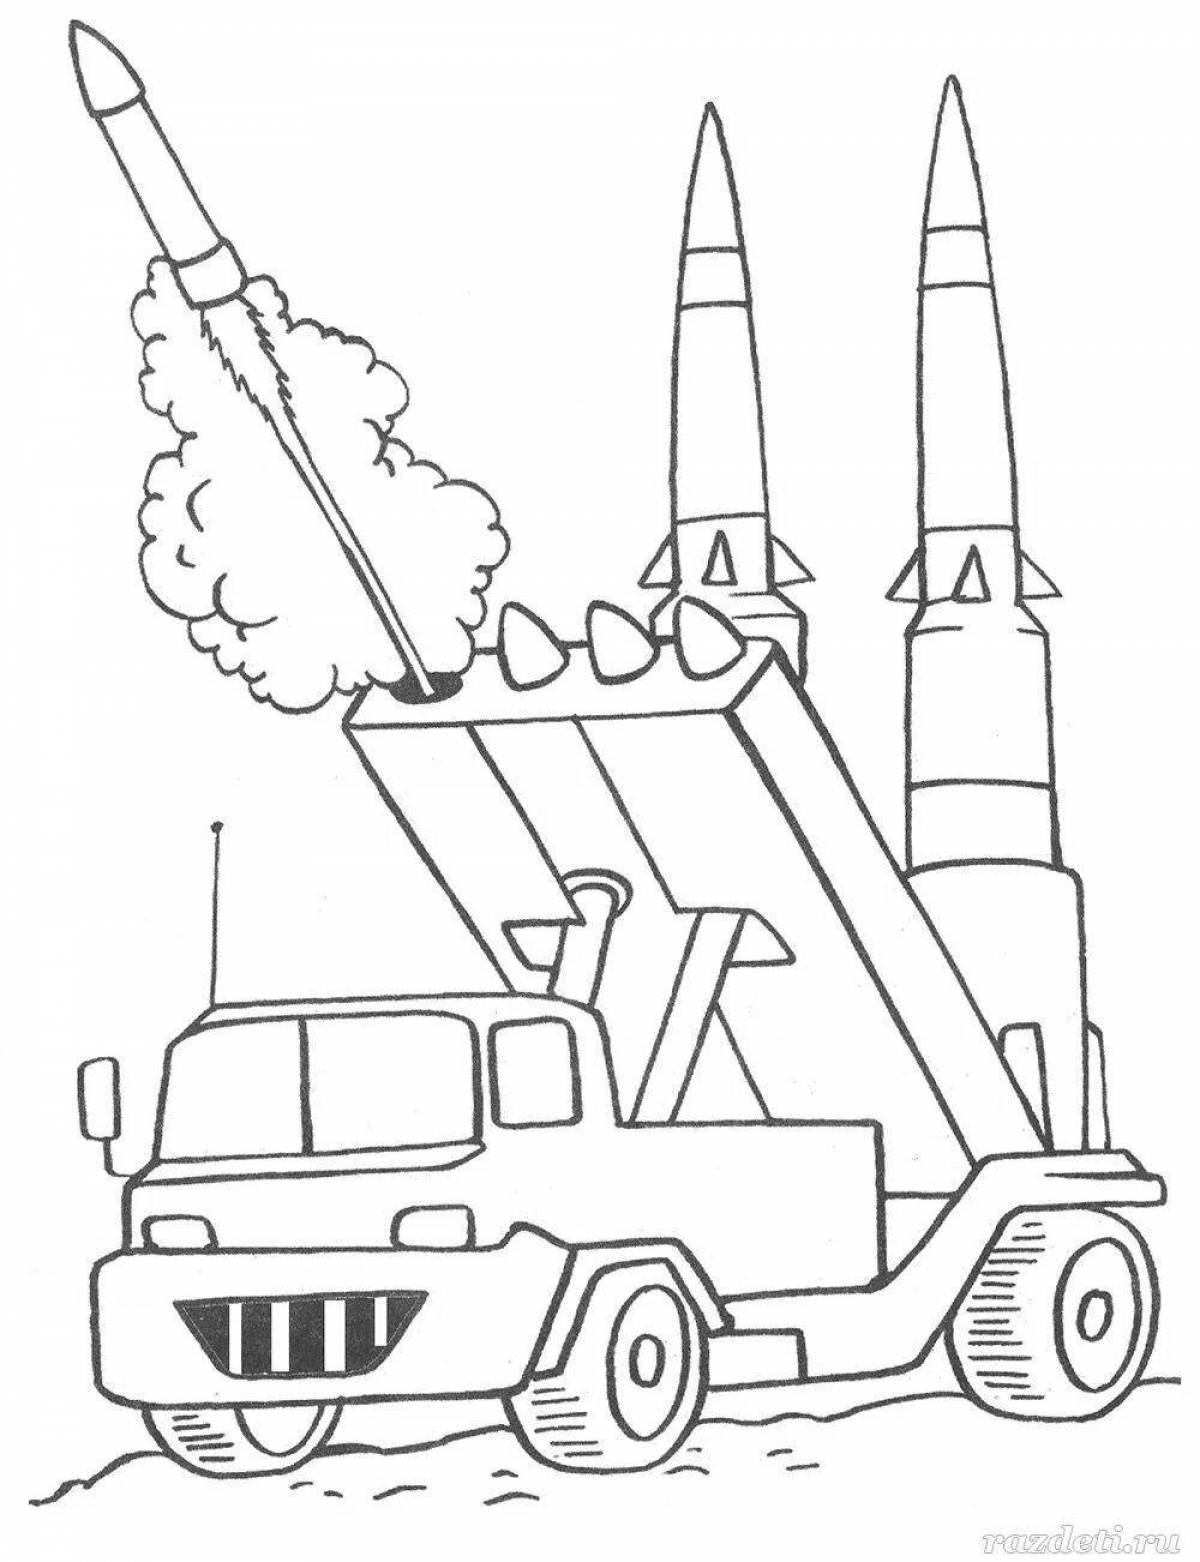 Awesome military vehicle coloring page